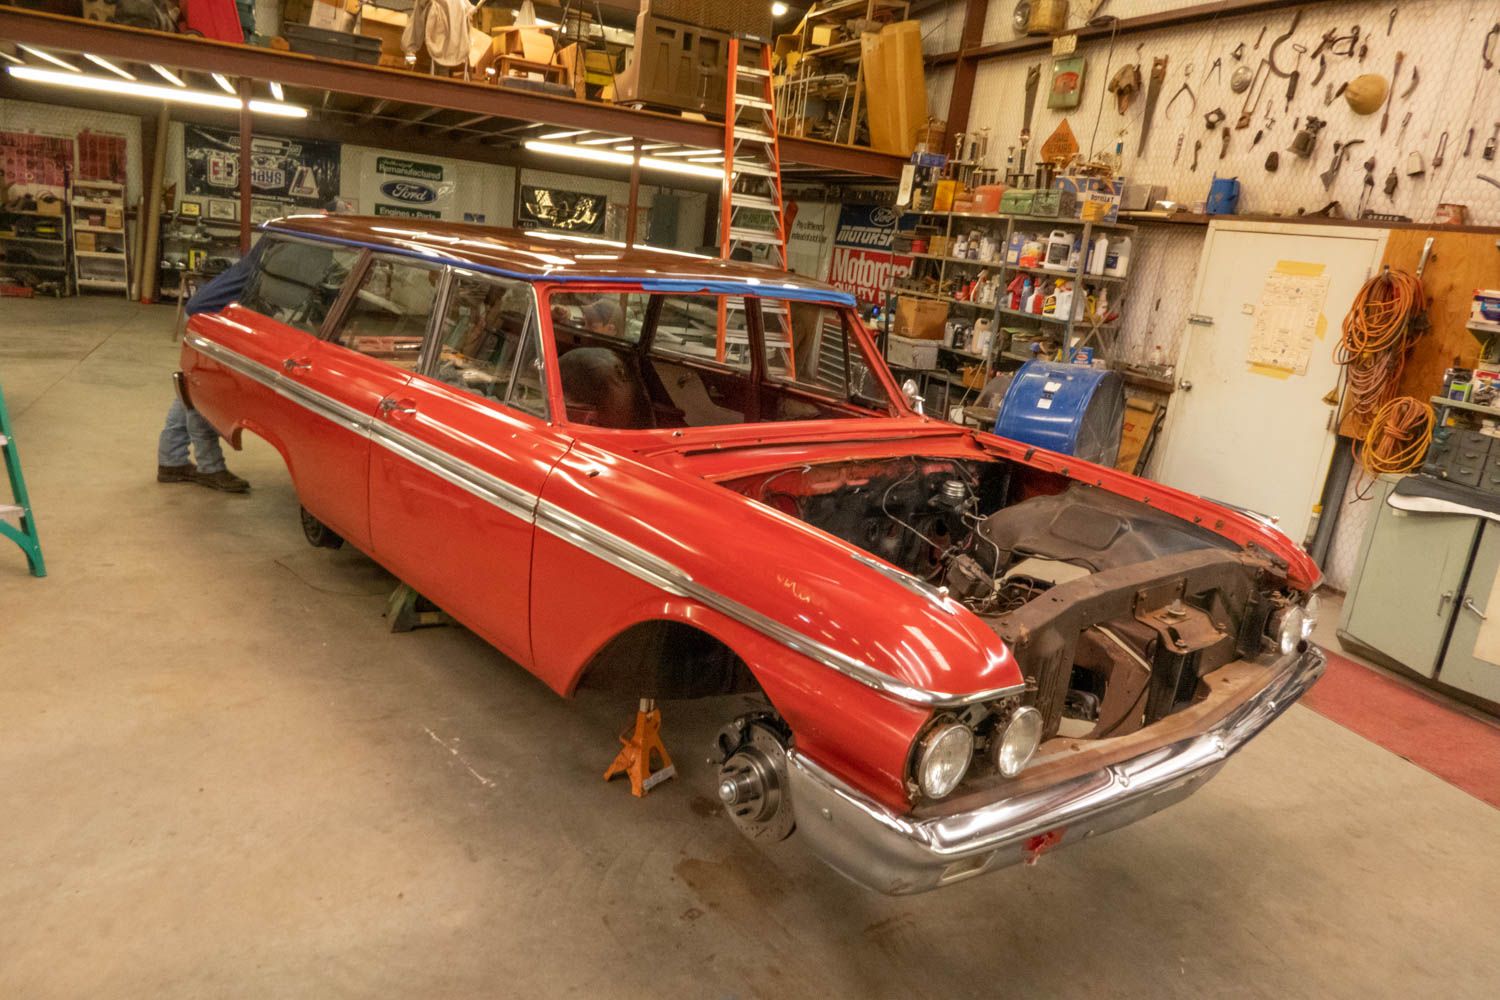 Stripped 1962 Ford Country Sedan in shop